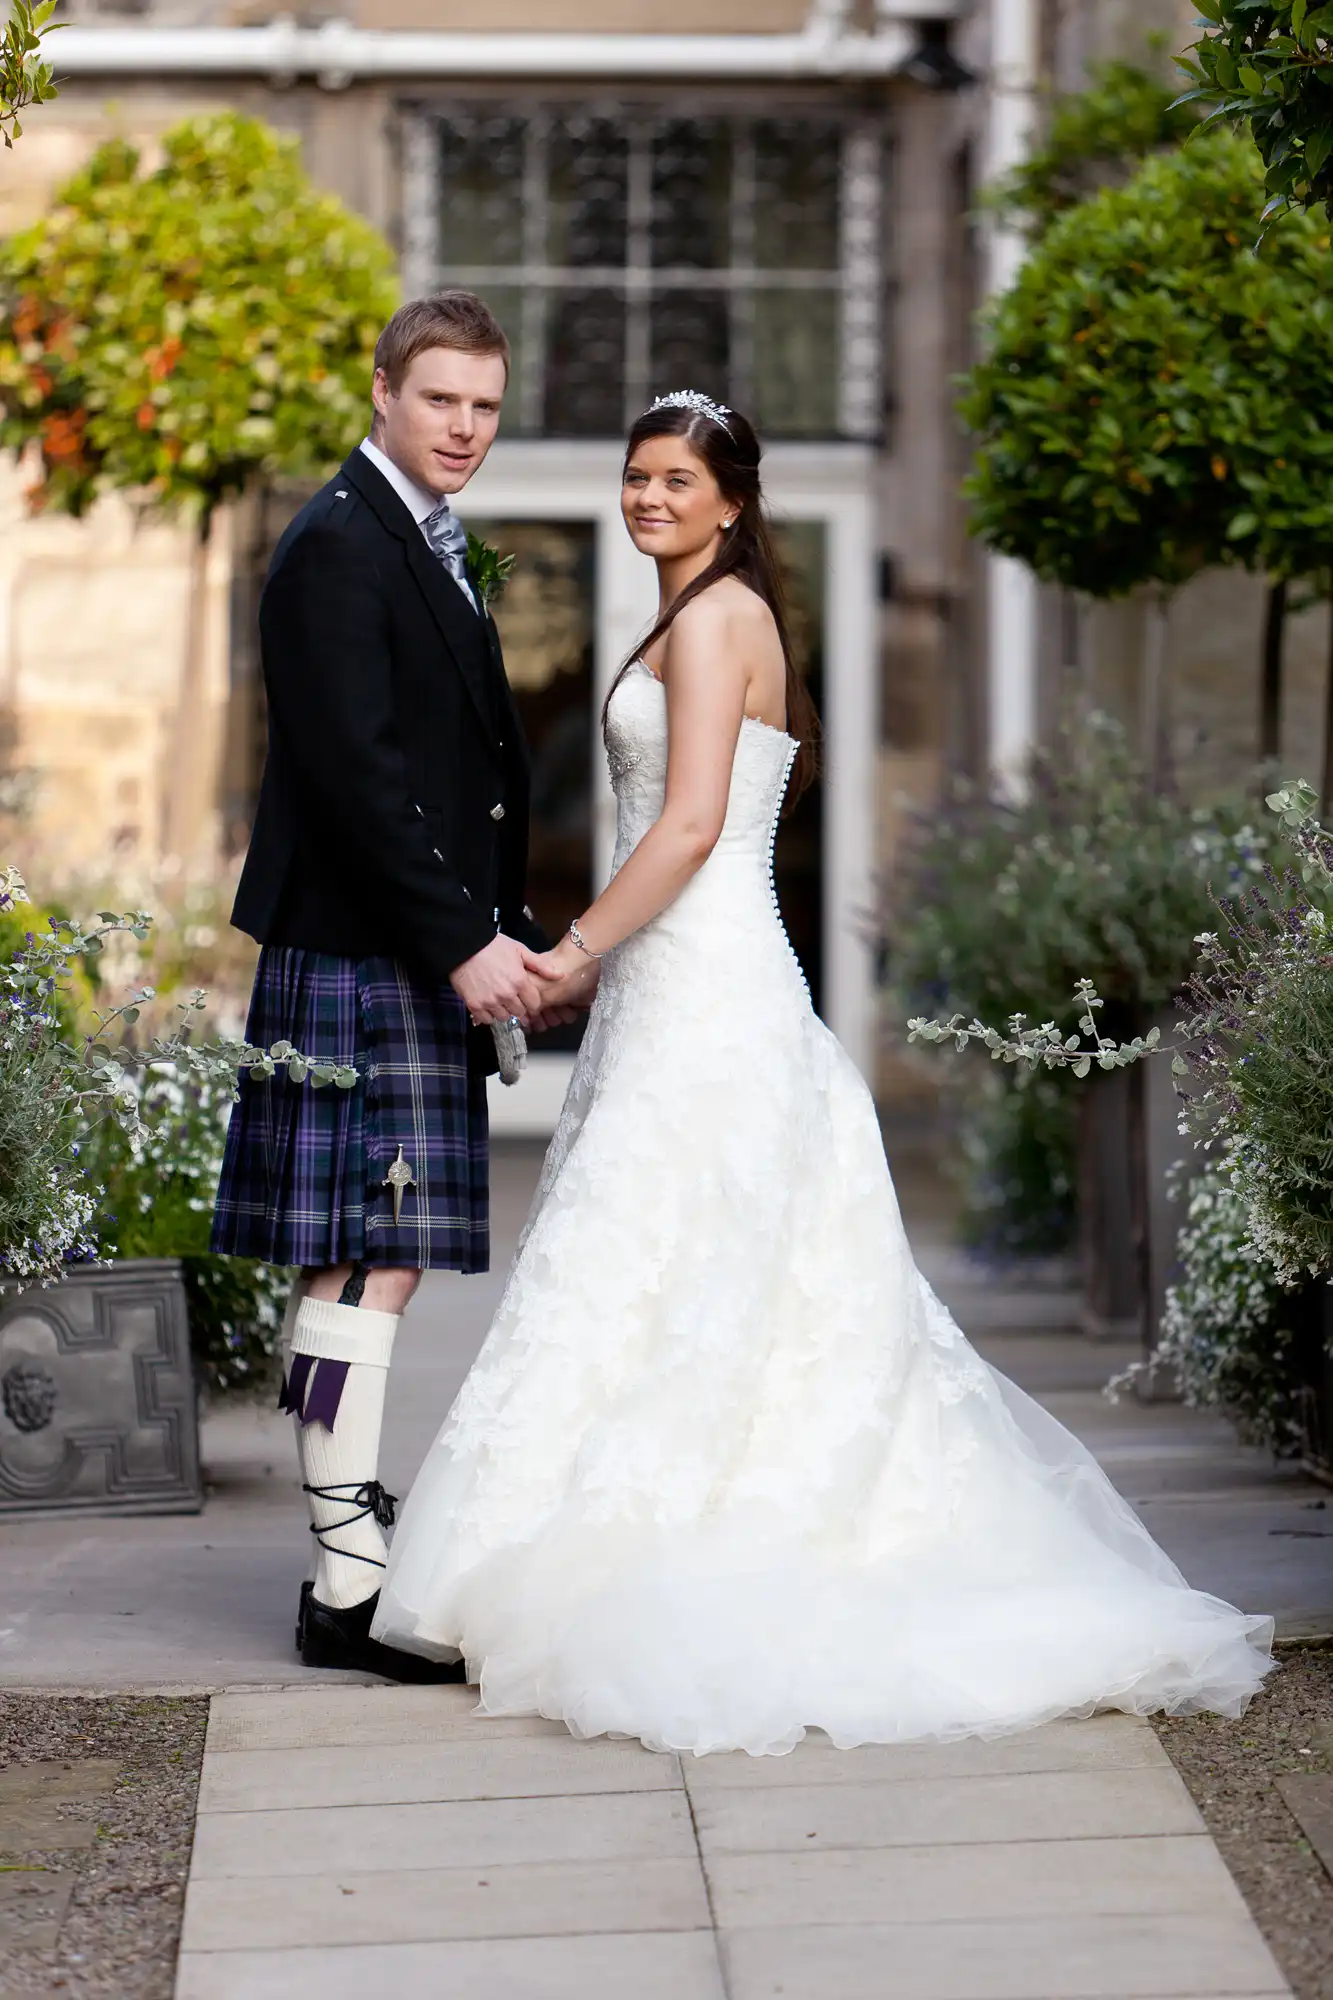 A bride in a white gown and a groom in a kilt holding hands in a garden pathway, with a historical building in the background.